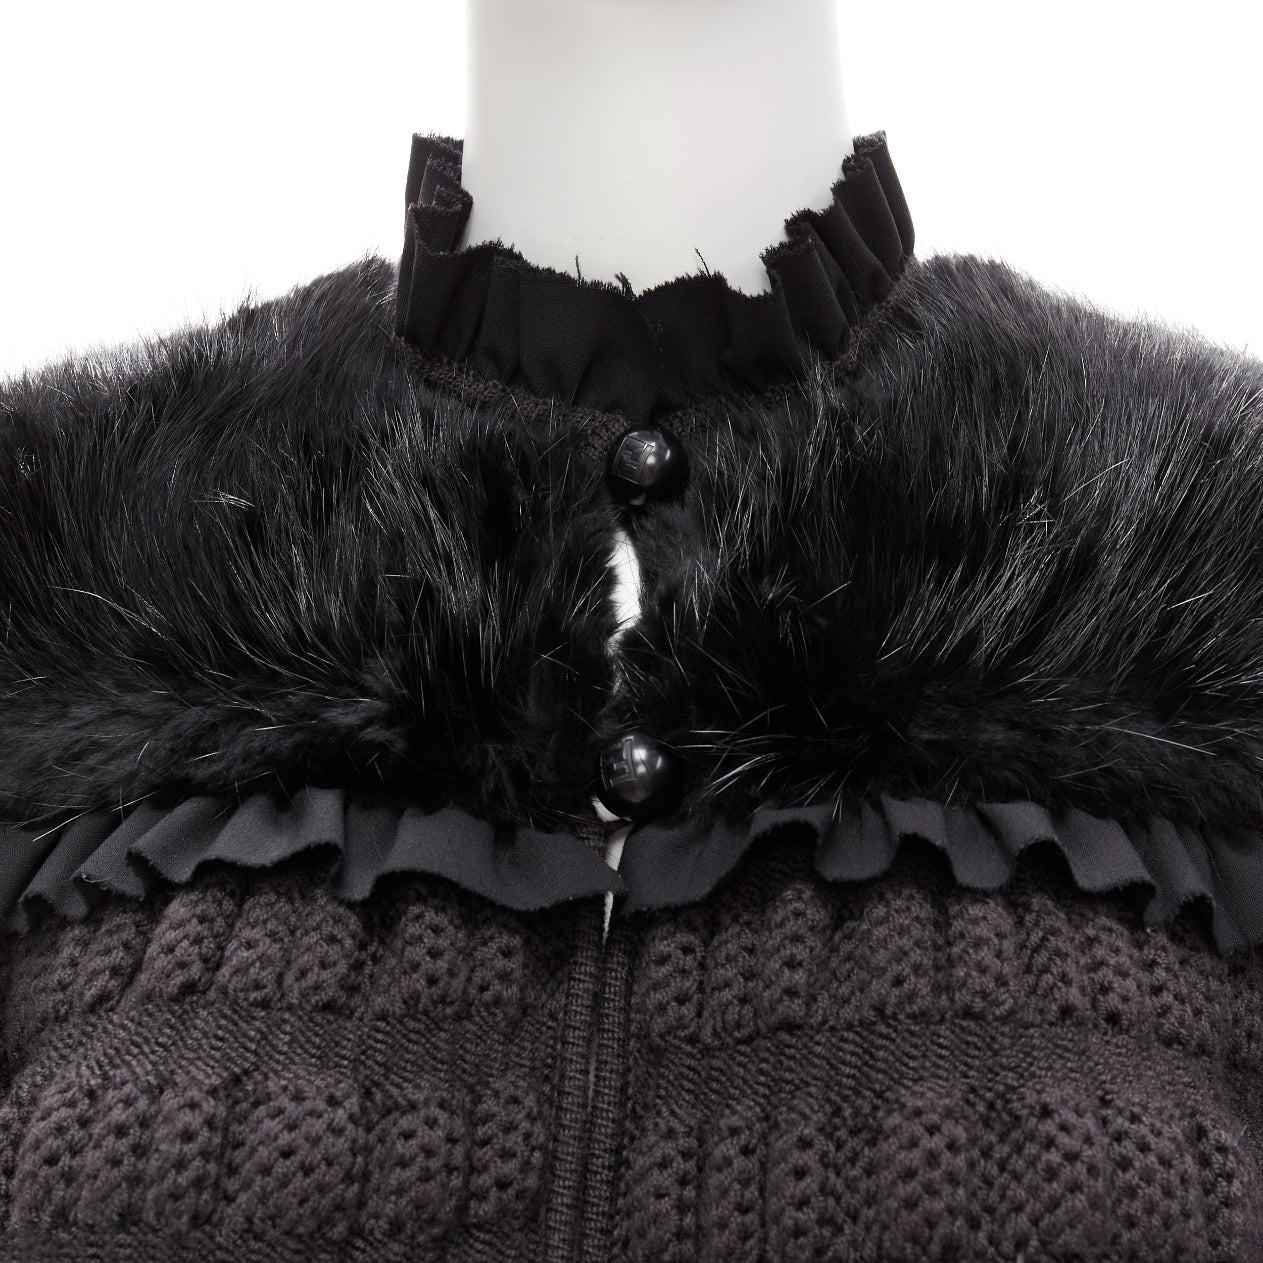 FENDI black fur panel virgin wool crochet chunky knit bell coat IT40 S
Reference: TGAS/D00788
Brand: Fendi
Collection: 2008
Material: Fur, Virgin Wool
Color: Black
Pattern: Solid
Closure: Button
Extra Details: FF logo sphere buttons. Genuine fur